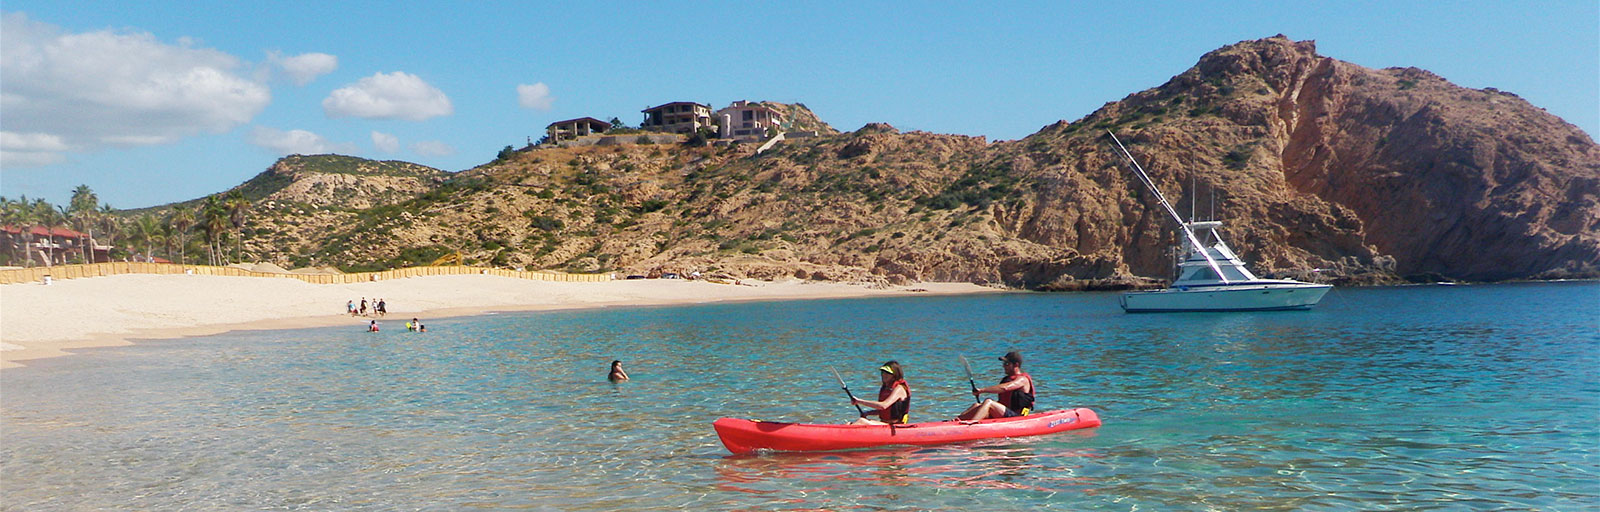 Sea Kayaking & Snorkeling on a Mexico Yoga Retreat: Tranquil Bay